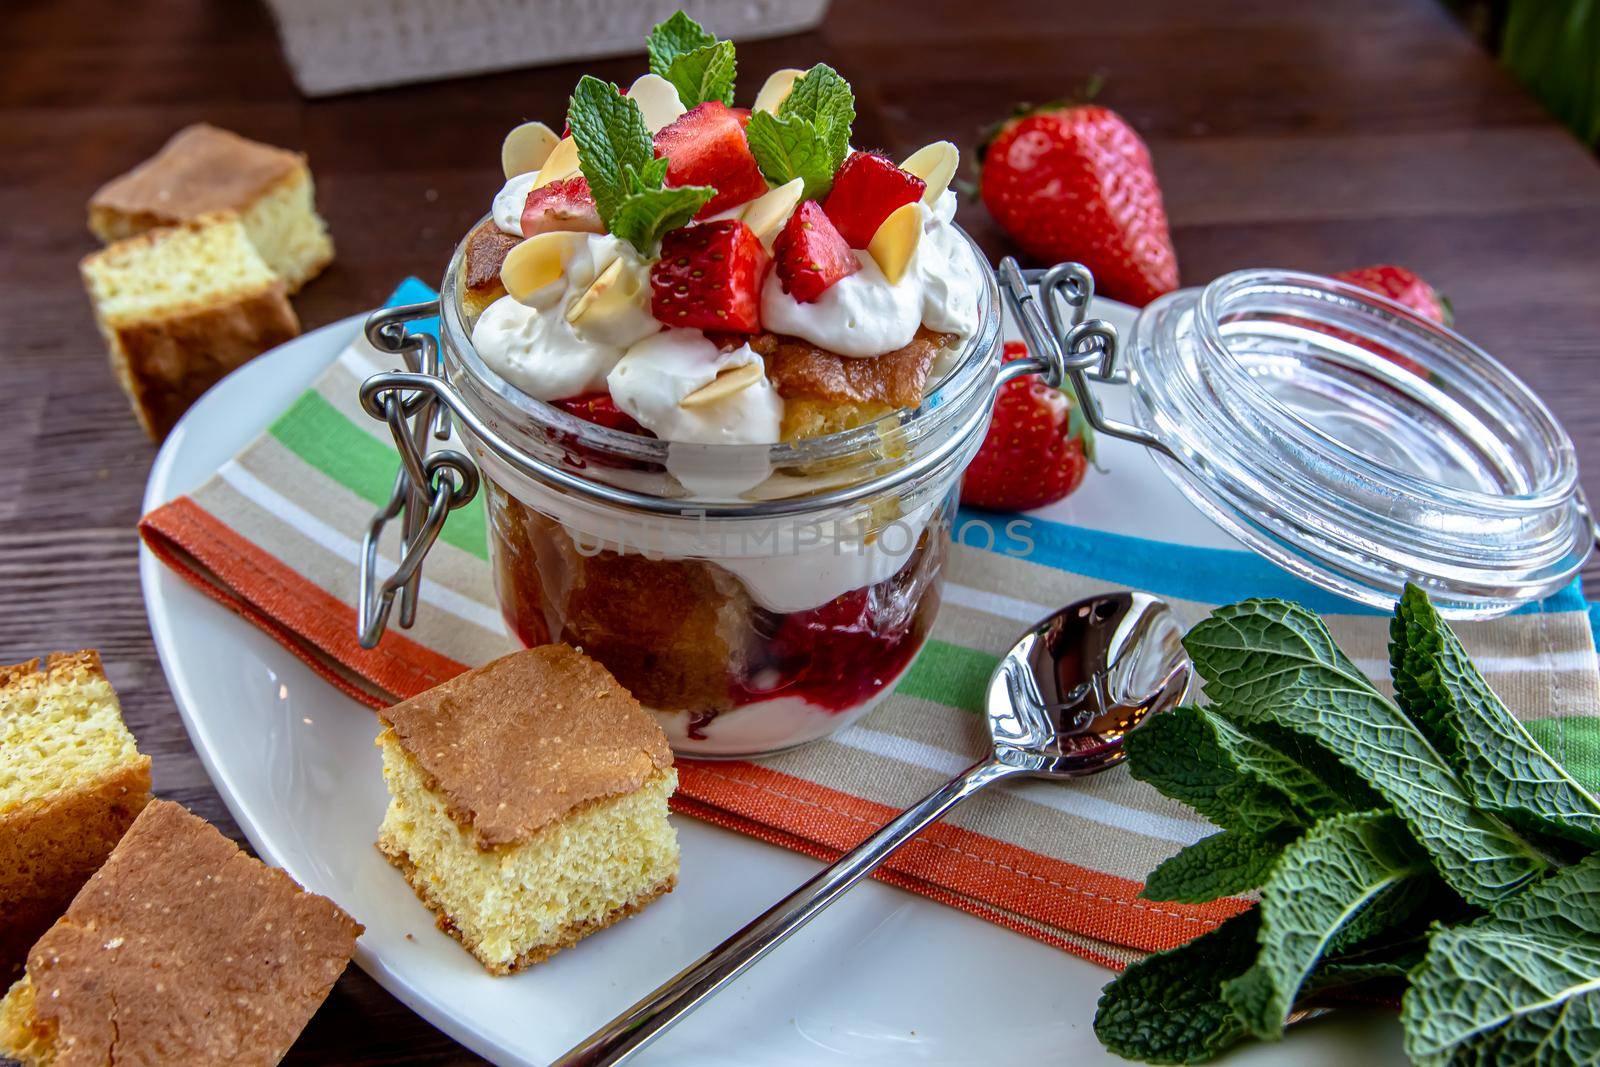 Layered Dessert of chocolate sponge cake, whipped cream or ricotta and fresh strawberries in a glass bowl. Trifle. Delicious gourmet breakfast. Selective Focus, copy space